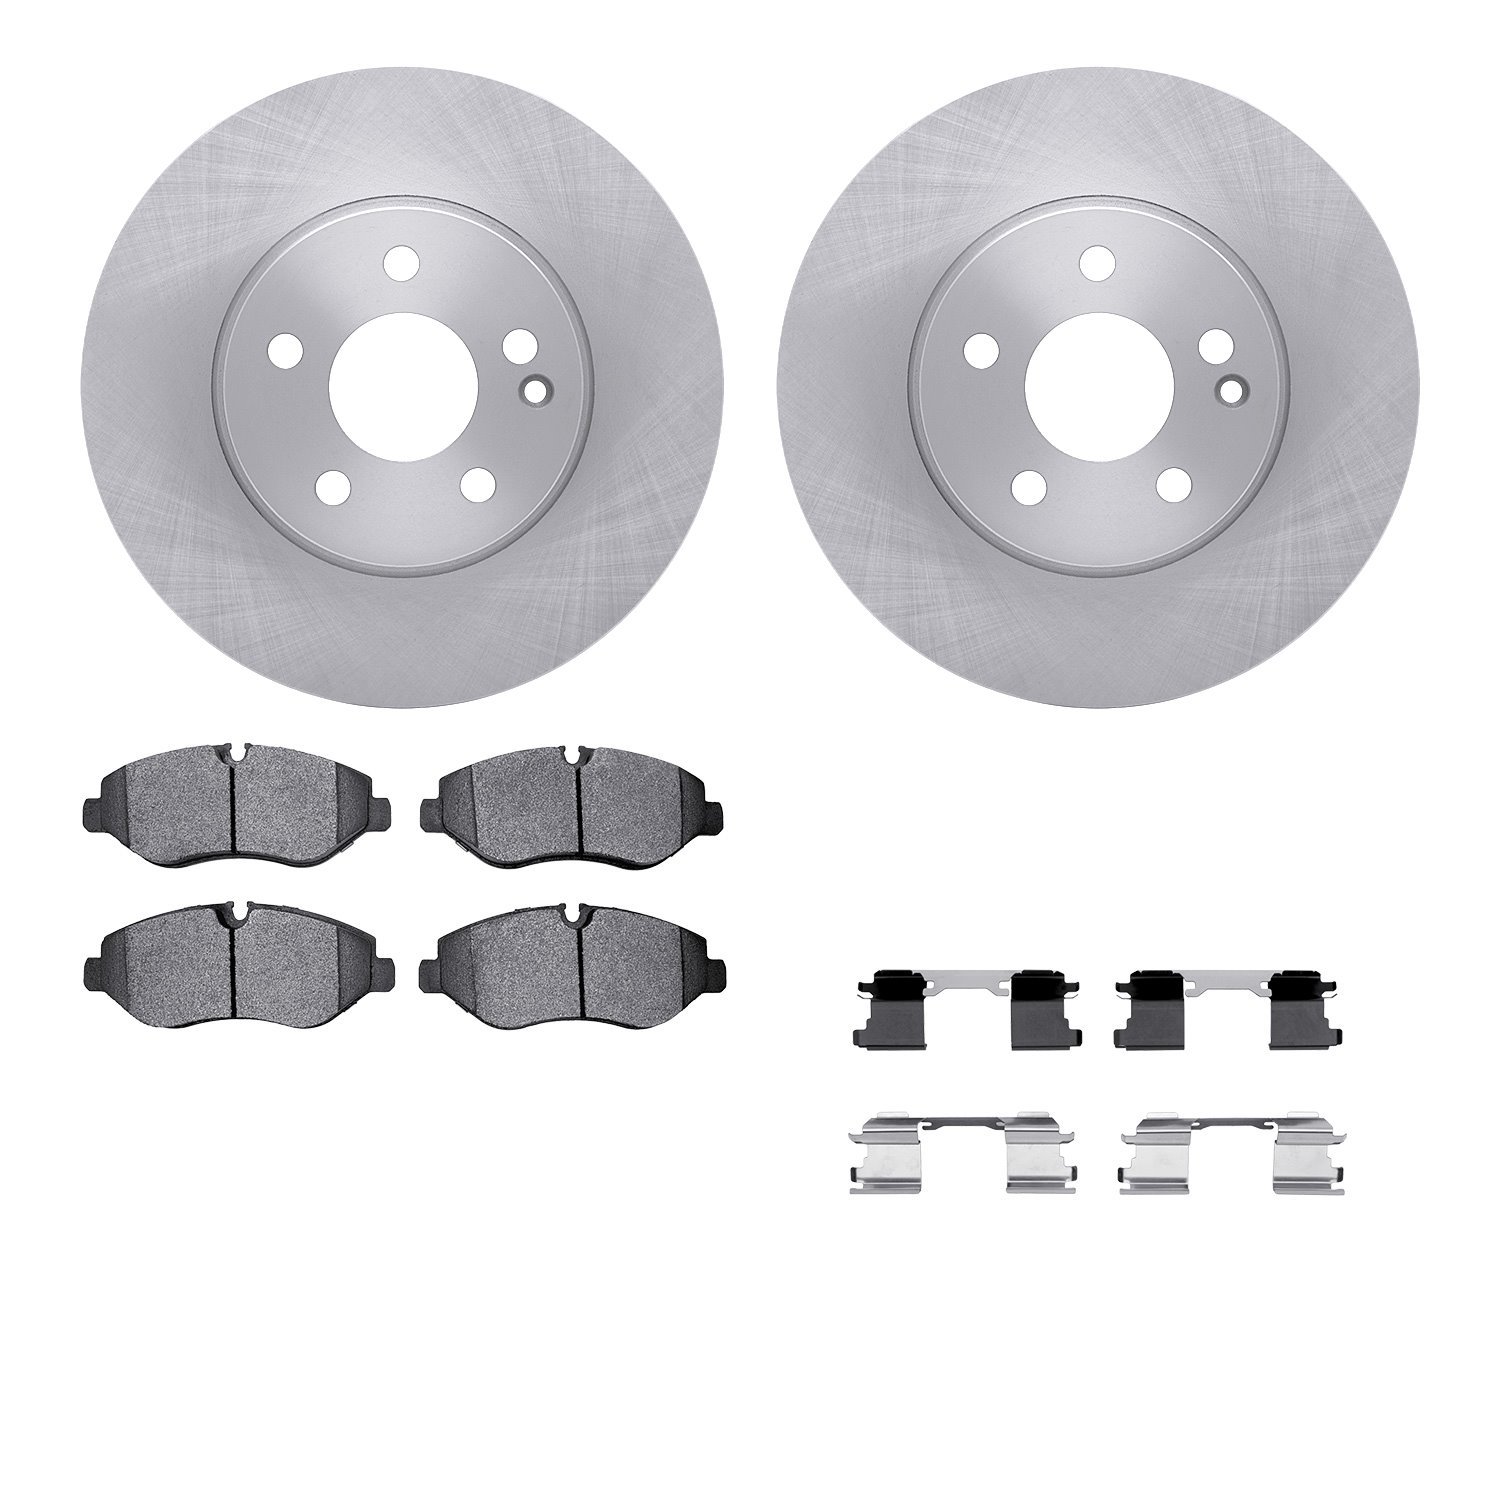 6212-63575 Brake Rotors w/Heavy-Duty Brake Pads Kit & Hardware, Fits Select Mercedes-Benz, Position: Front